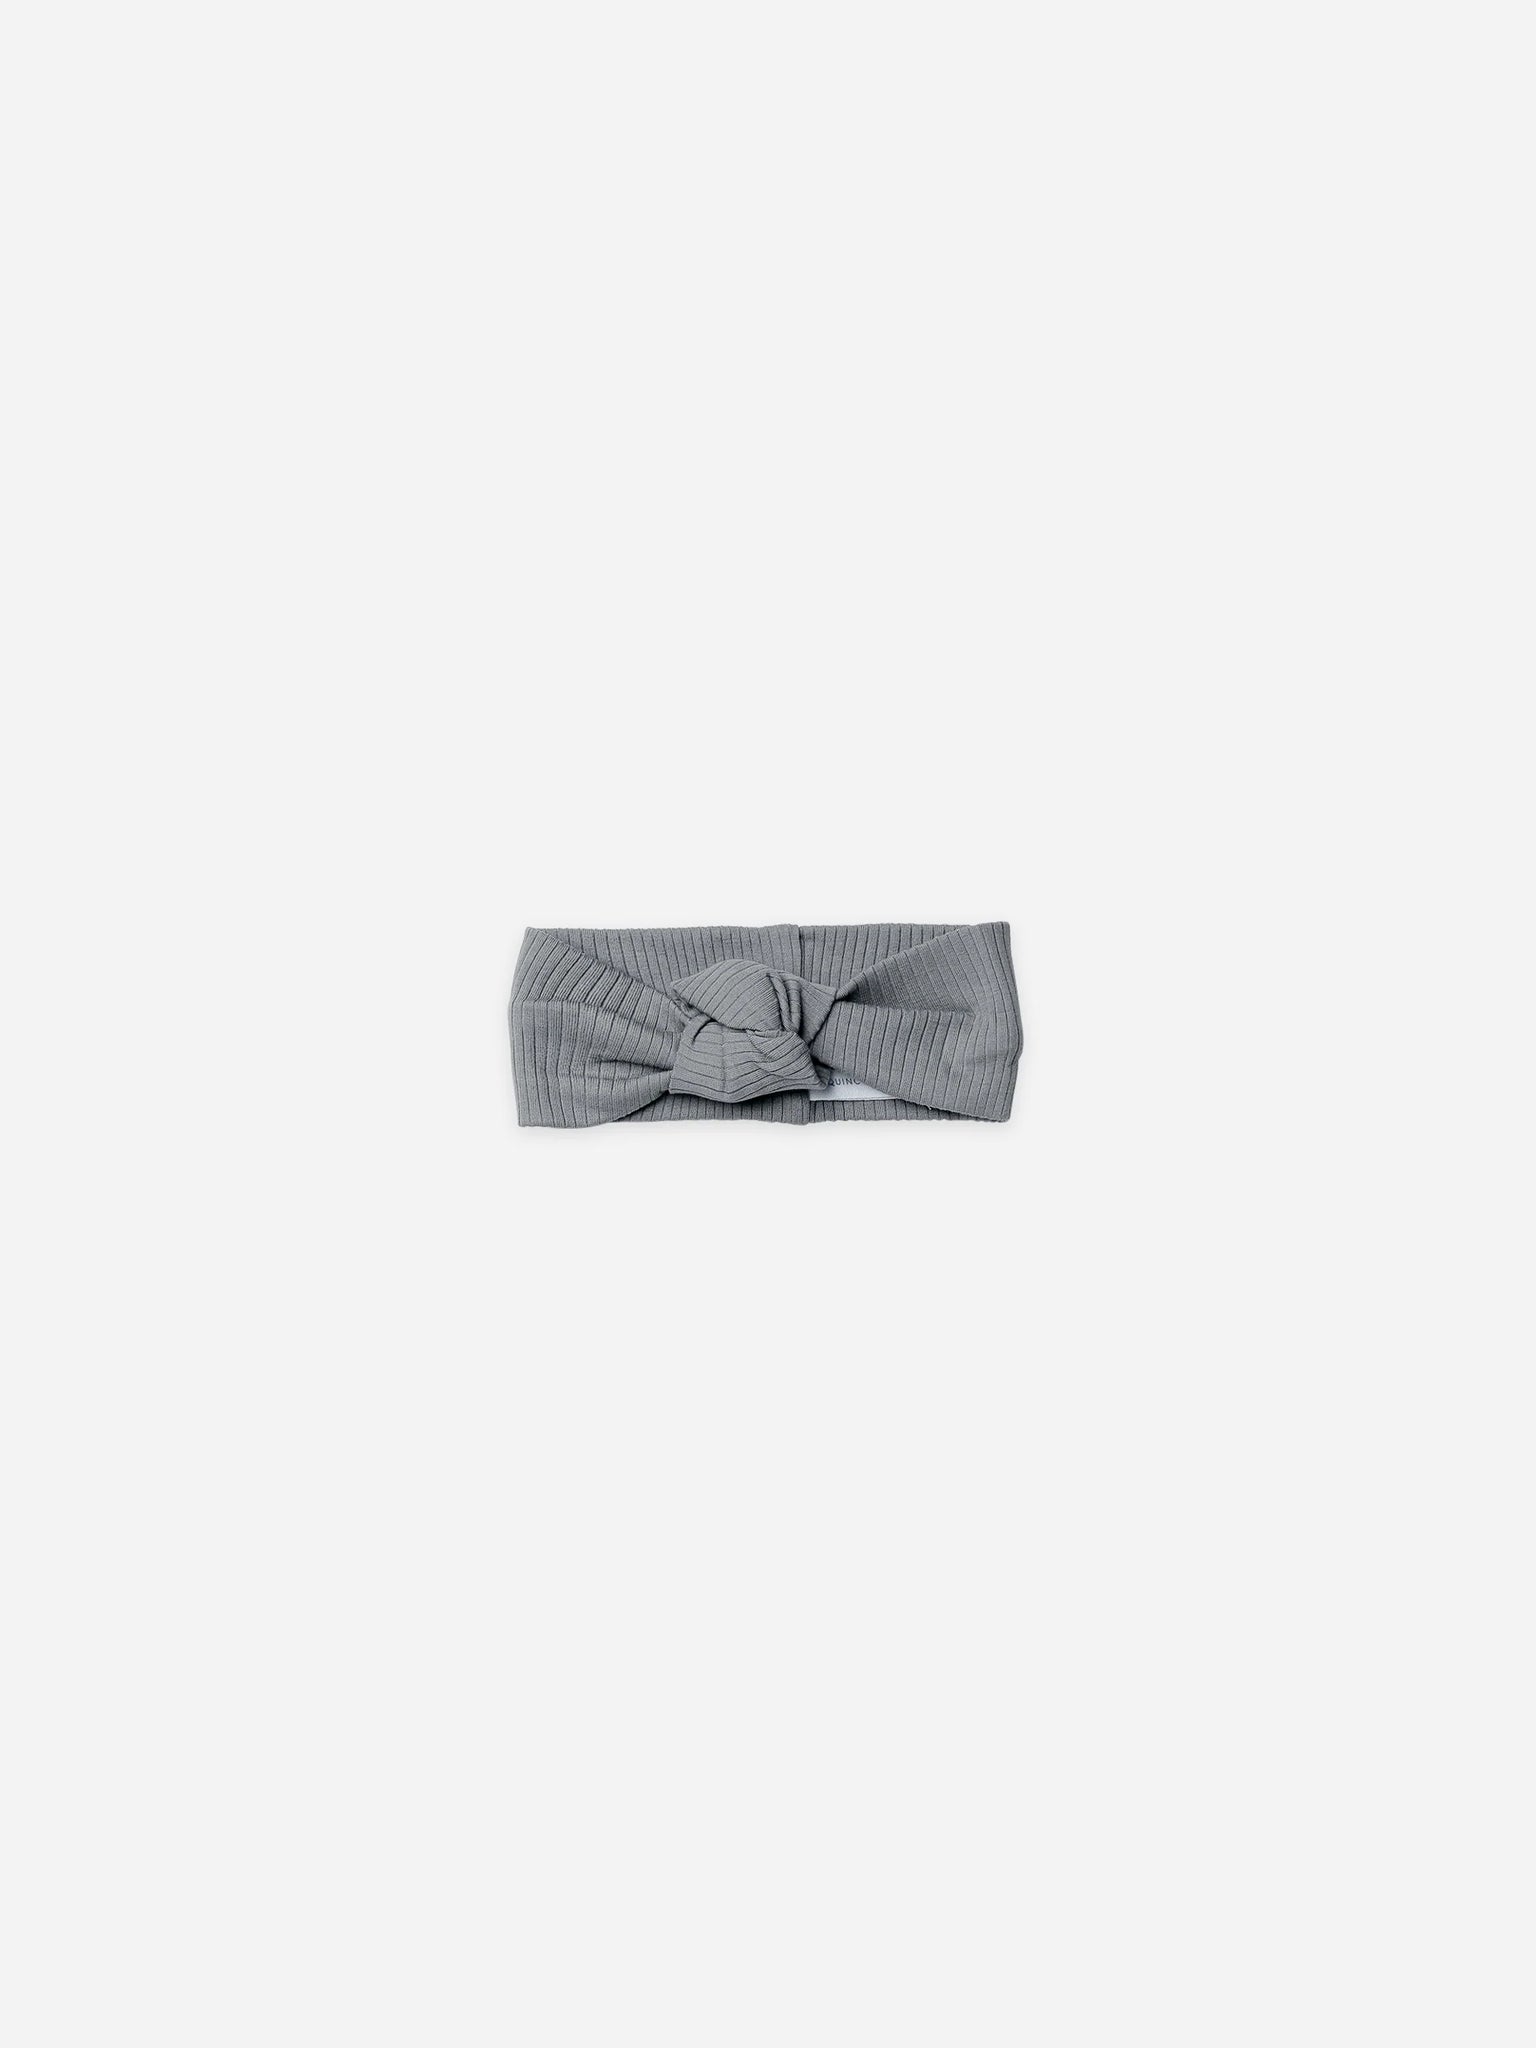 RIBBED KNOTTED HEADBAND | OCEAN